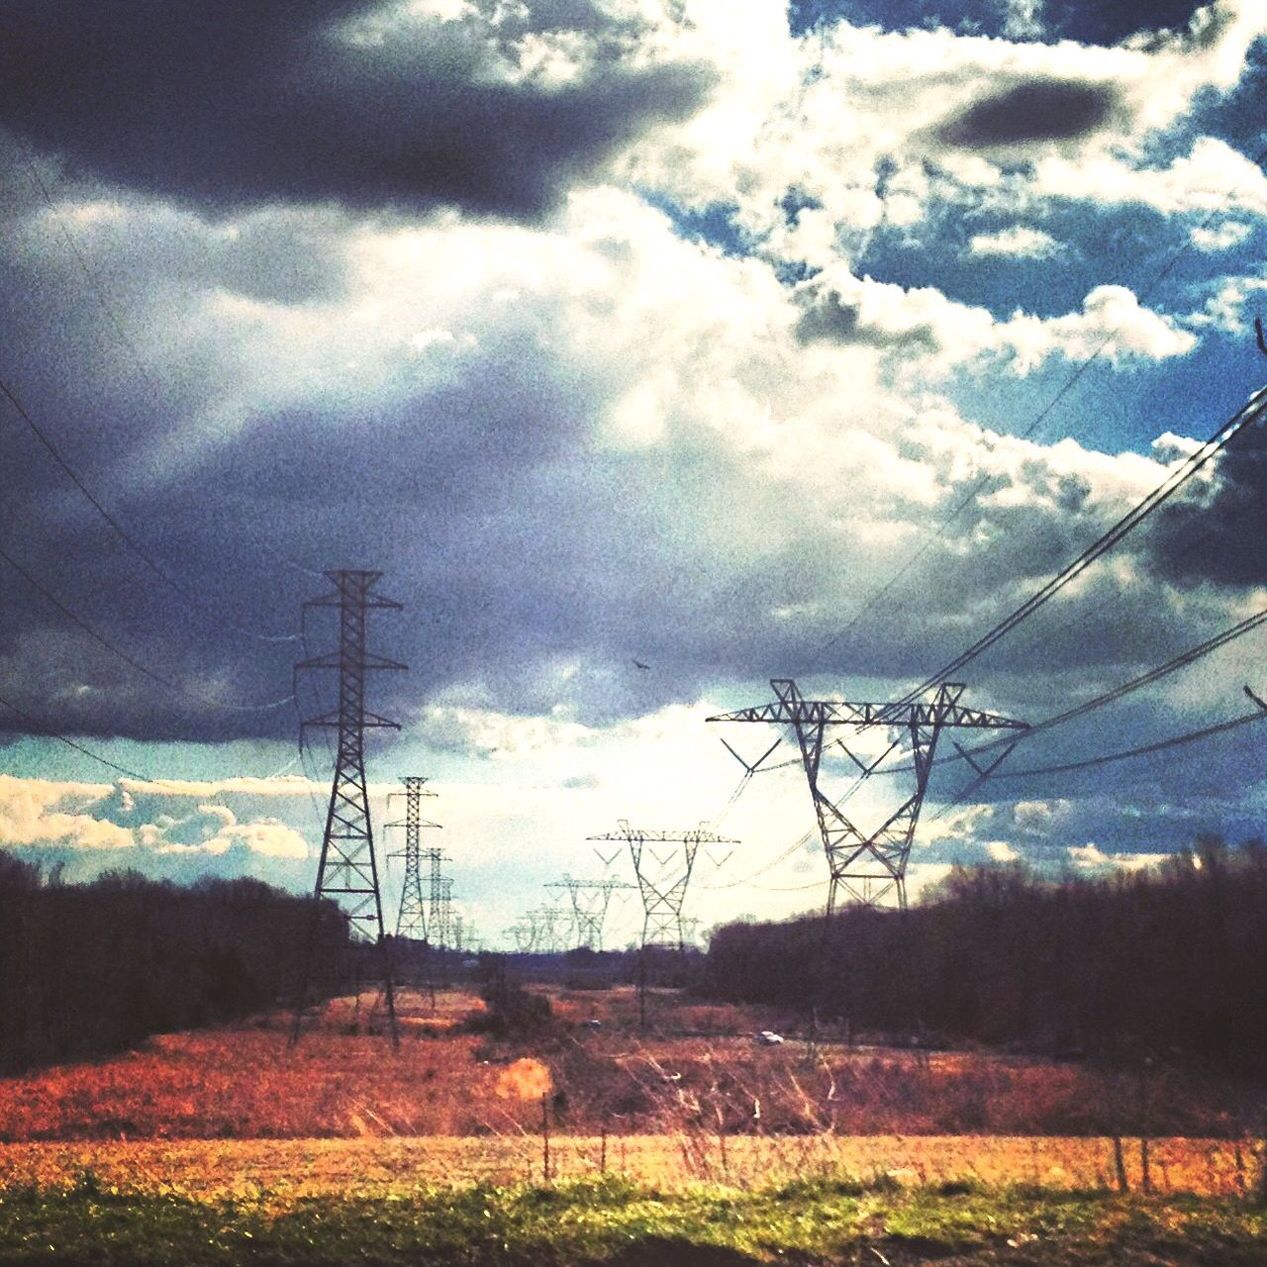 sky, cloud - sky, tree, no people, nature, electricity, scenics, tranquility, outdoors, technology, tranquil scene, day, electricity pylon, landscape, beauty in nature